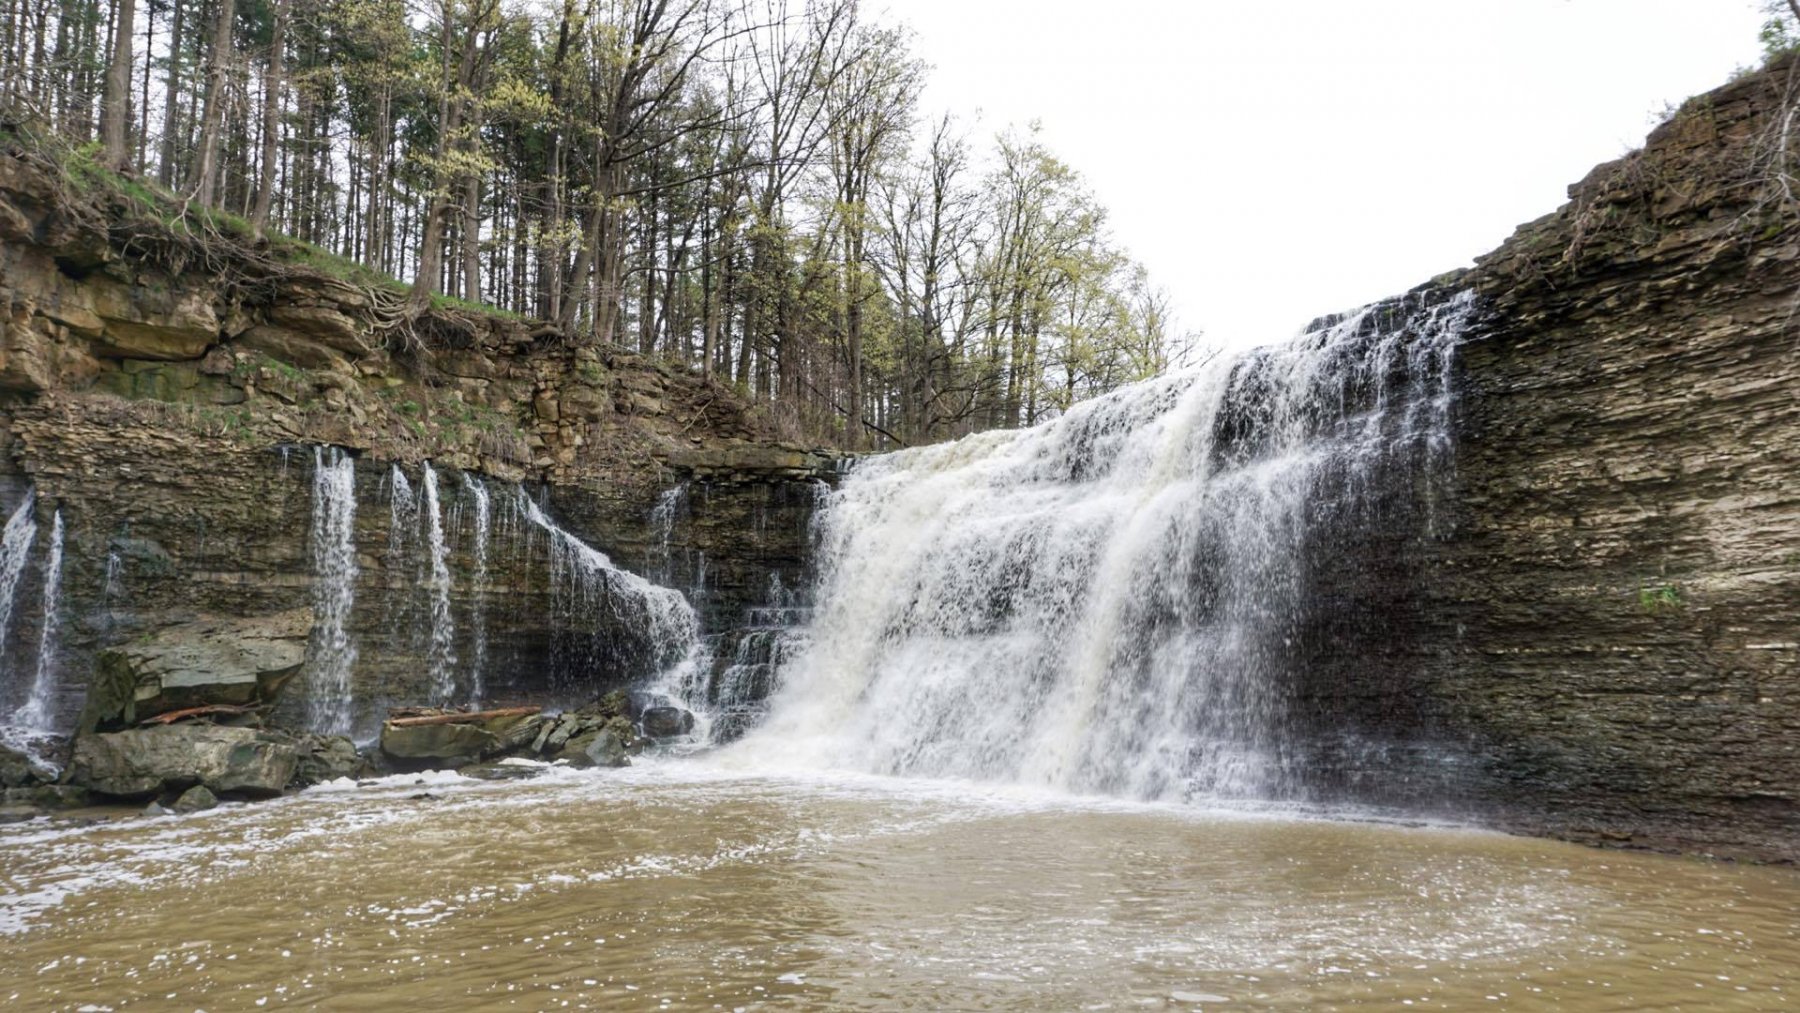 Ball’s Falls Conservation Area